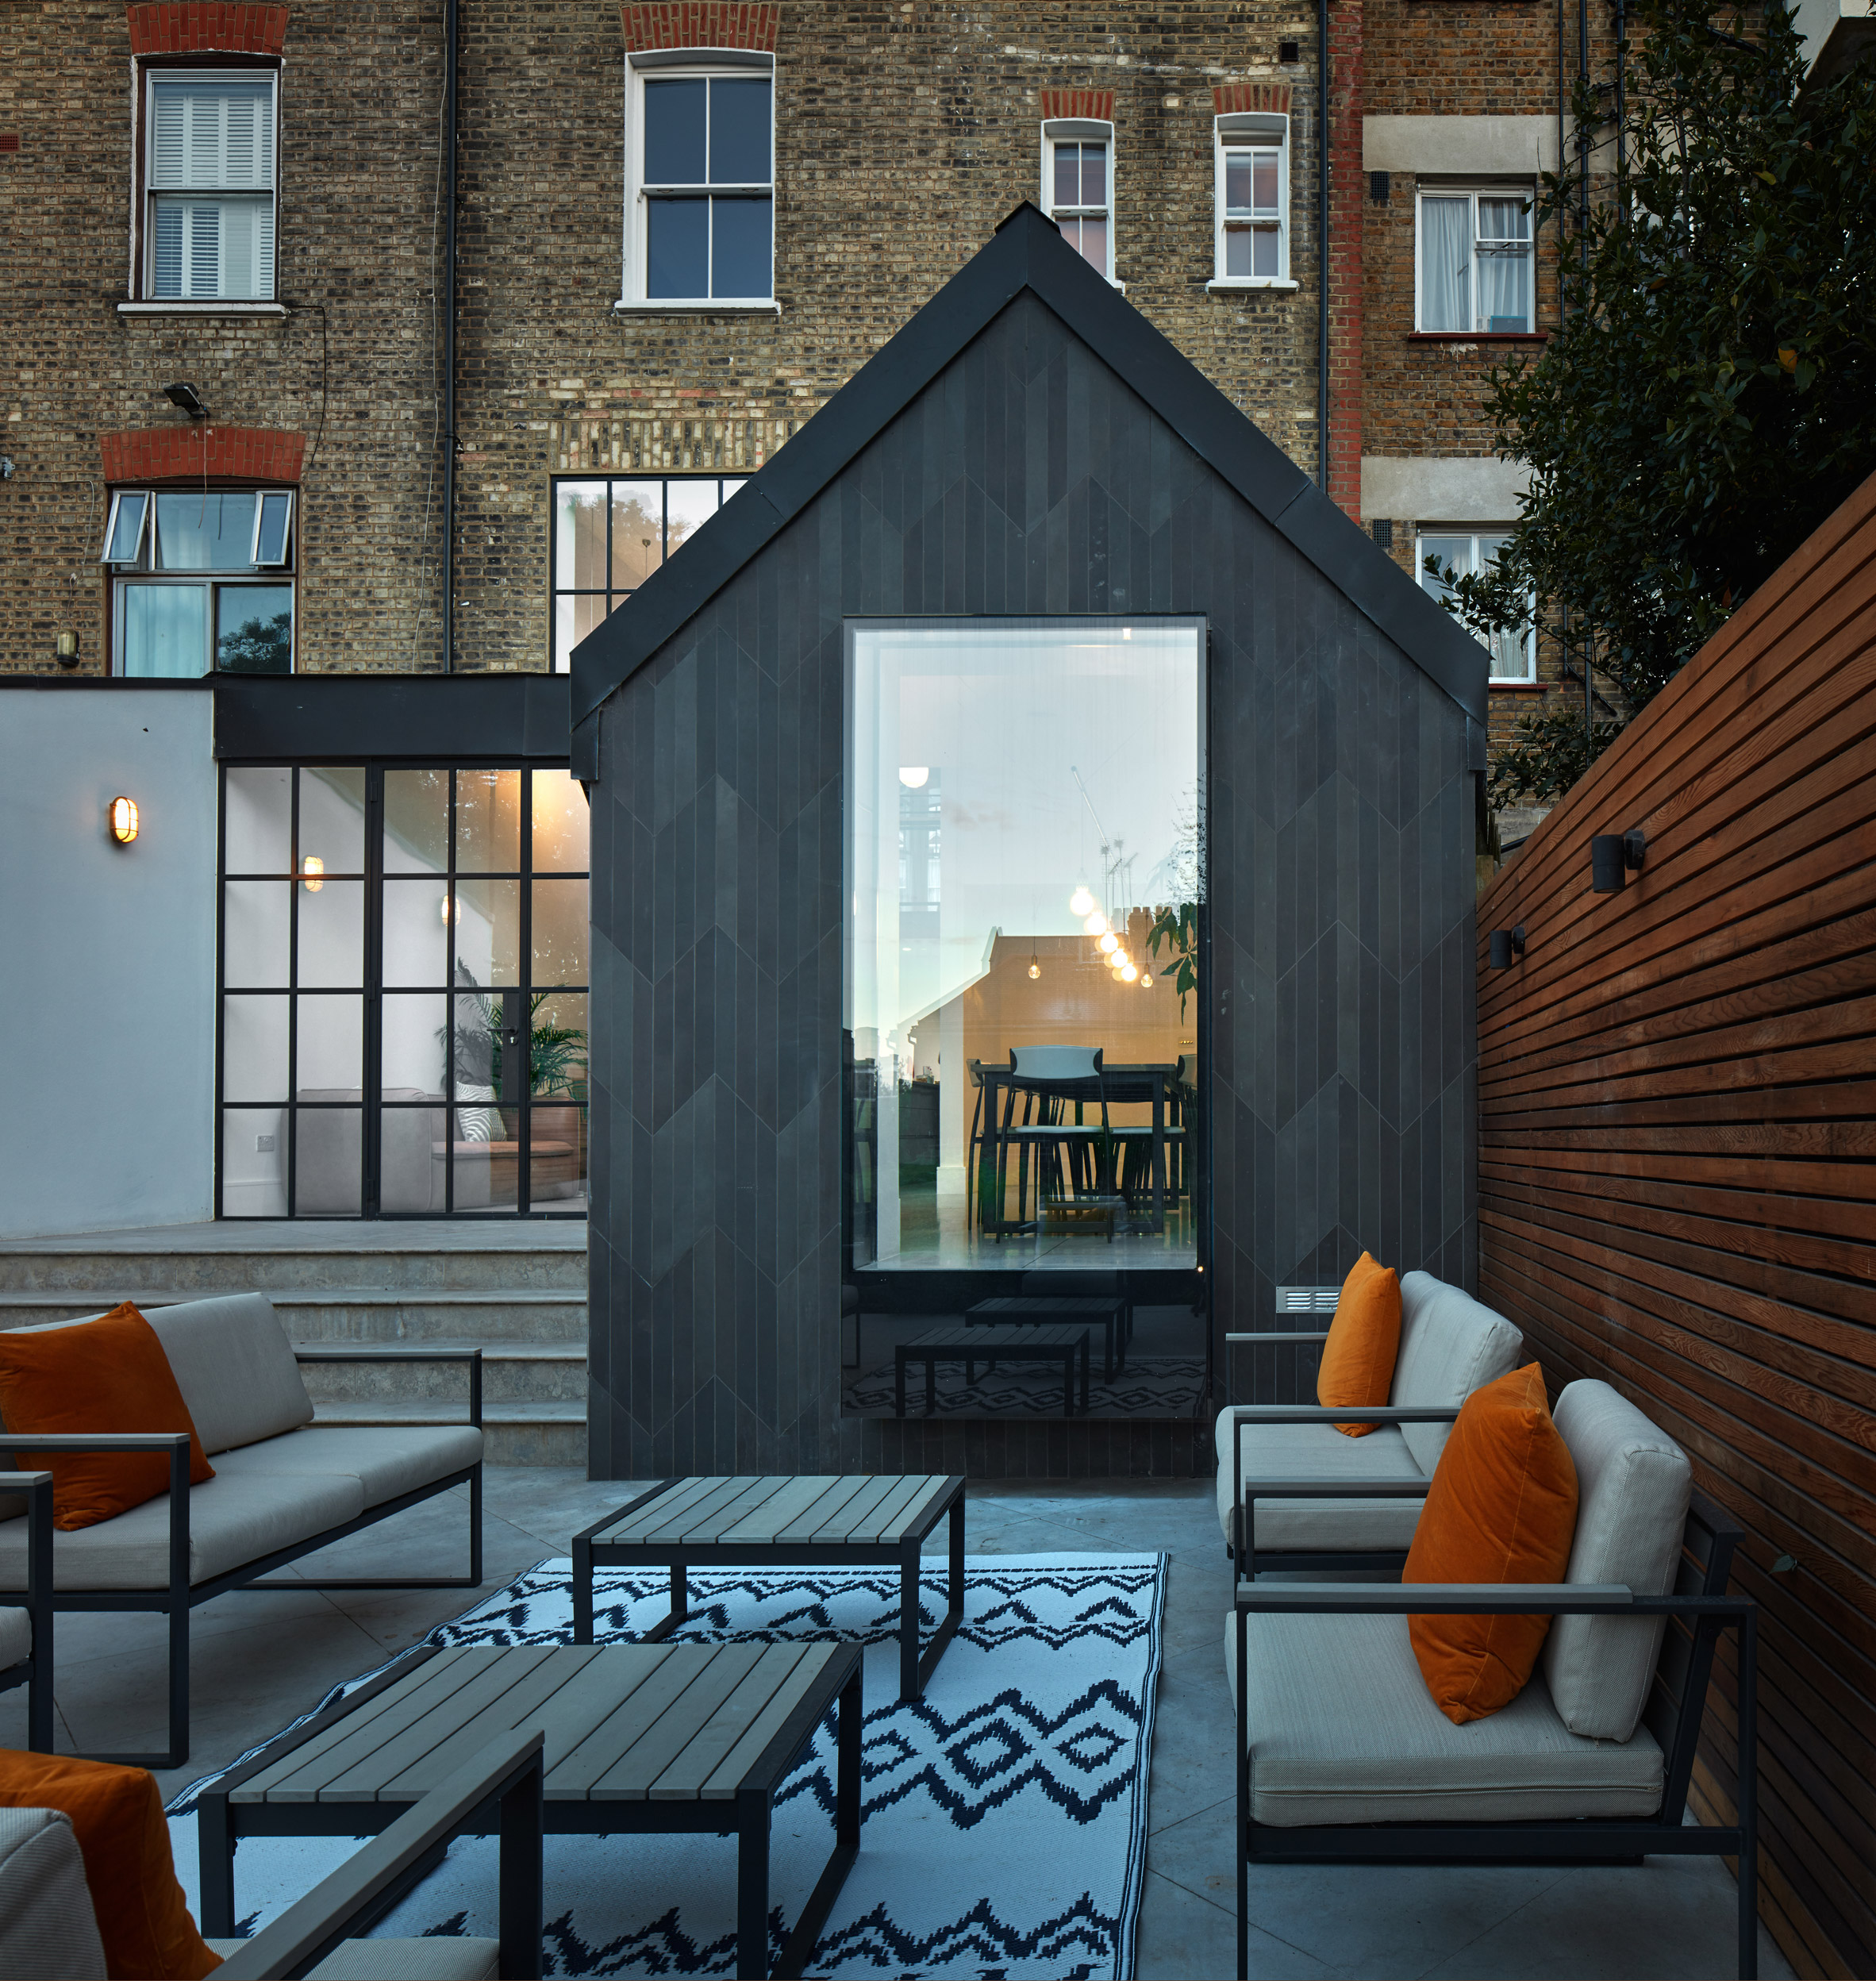 Merrett Houmøller Architects has renovated and extended a townhouse in north London